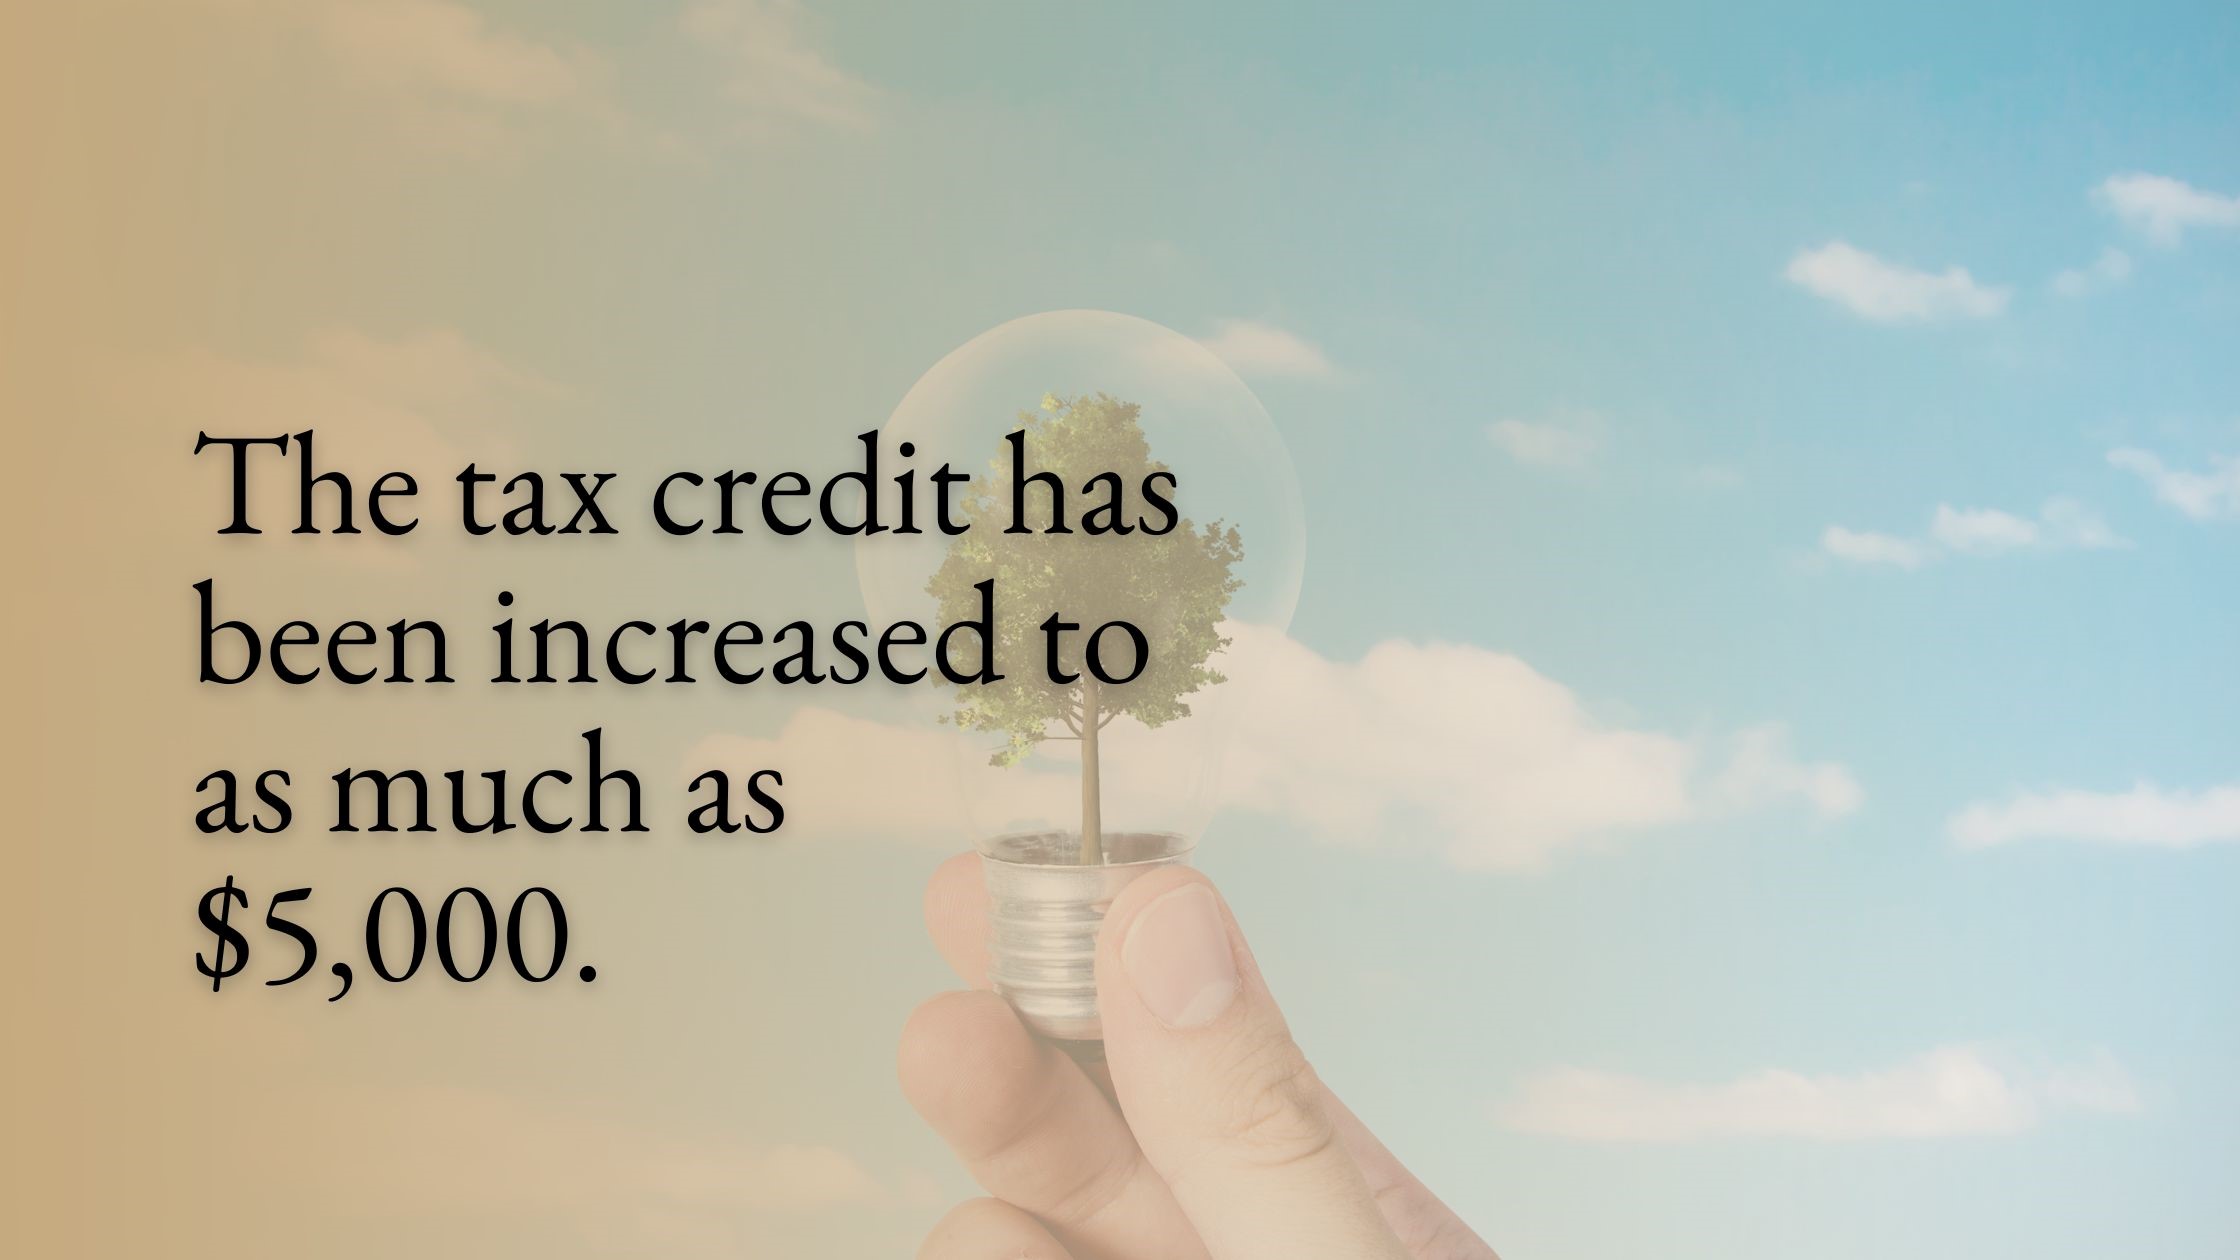 Tax Credit Has Been Increased